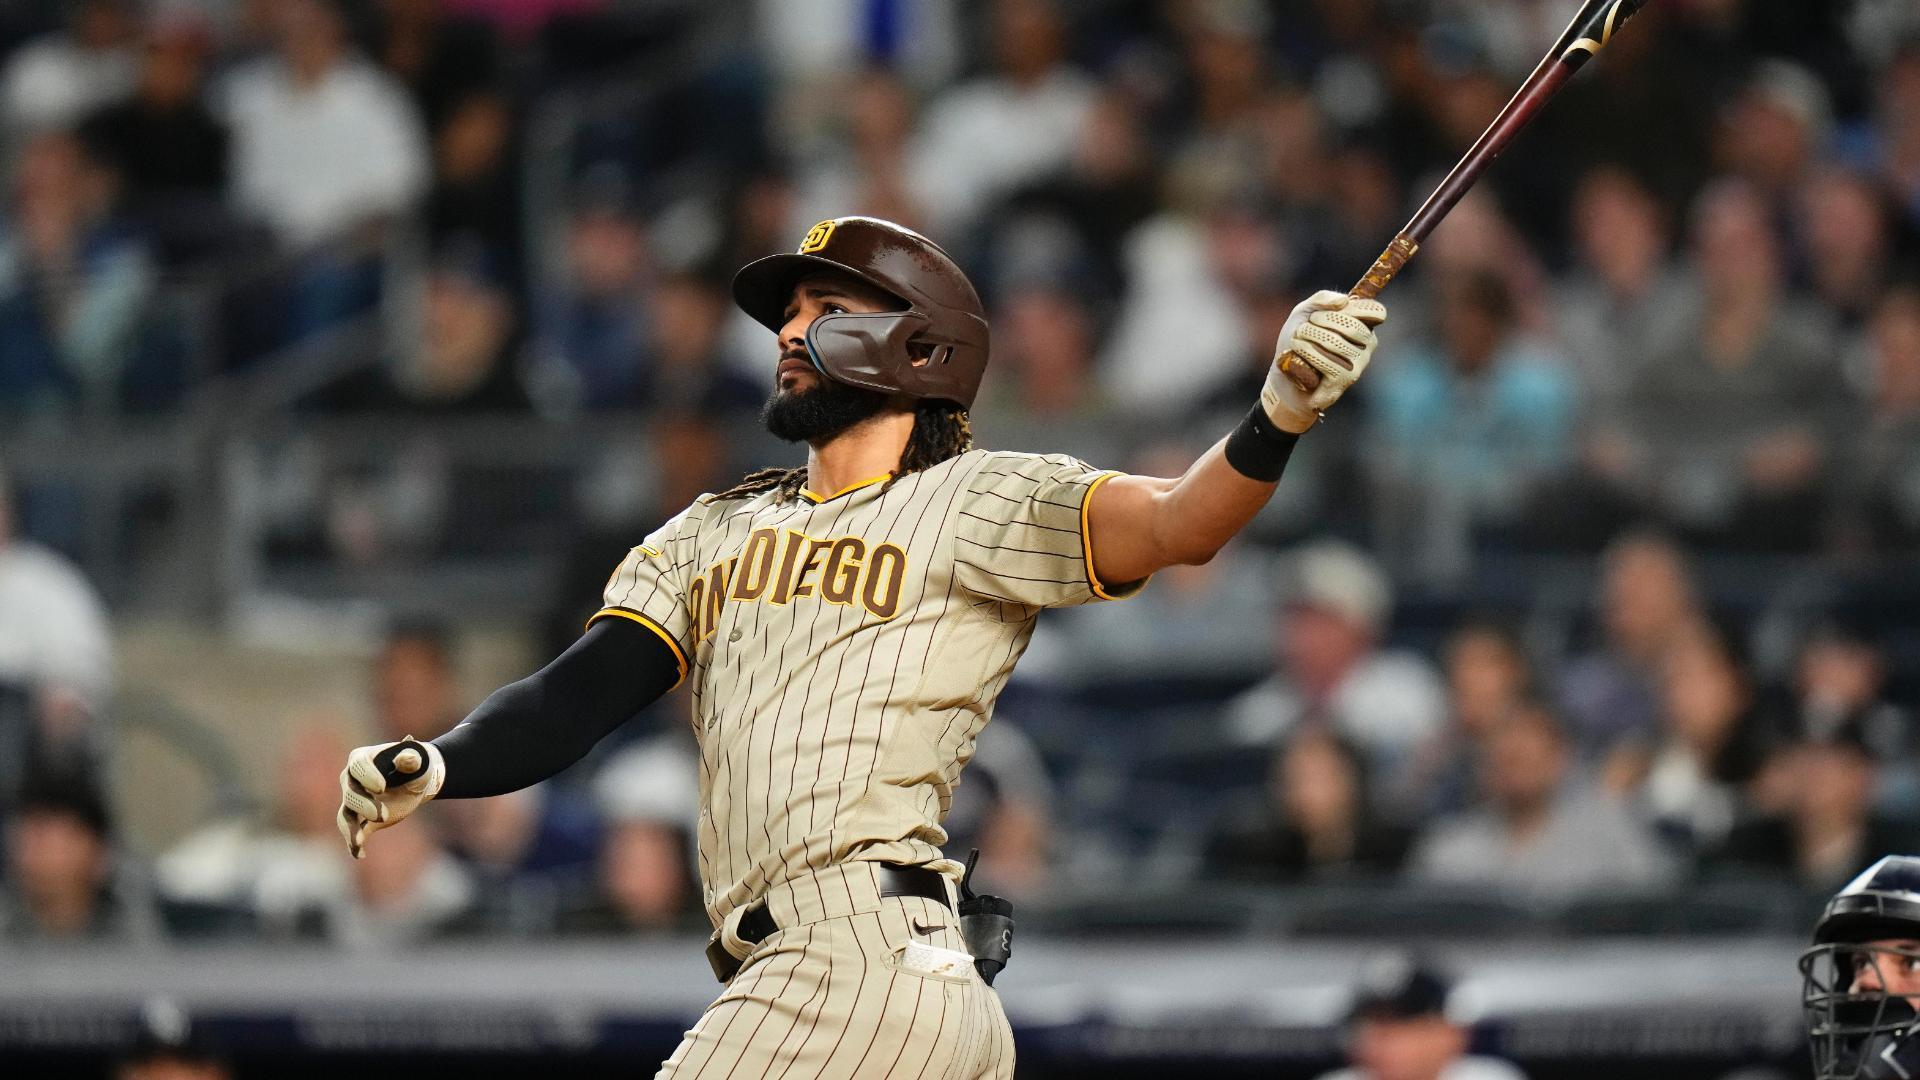 Tatis and Soto hit consecutive home runs and the Padres beat the Giants 7-3